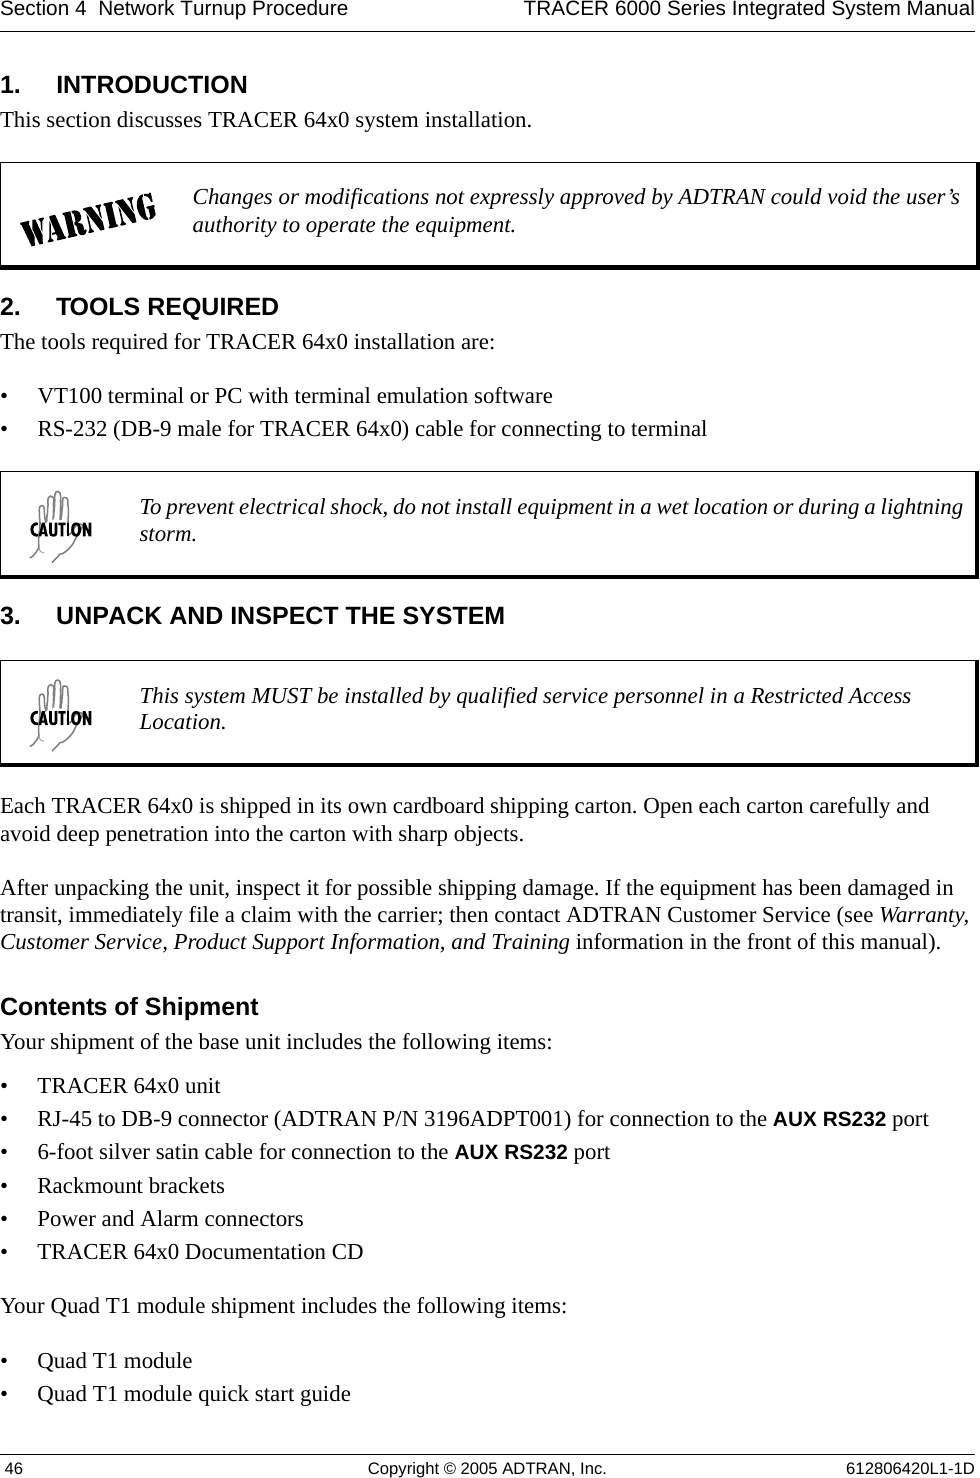 Section 4  Network Turnup Procedure TRACER 6000 Series Integrated System Manual 46 Copyright © 2005 ADTRAN, Inc. 612806420L1-1D1. INTRODUCTIONThis section discusses TRACER 64x0 system installation.2. TOOLS REQUIREDThe tools required for TRACER 64x0 installation are:• VT100 terminal or PC with terminal emulation software• RS-232 (DB-9 male for TRACER 64x0) cable for connecting to terminal3. UNPACK AND INSPECT THE SYSTEMEach TRACER 64x0 is shipped in its own cardboard shipping carton. Open each carton carefully and avoid deep penetration into the carton with sharp objects. After unpacking the unit, inspect it for possible shipping damage. If the equipment has been damaged in transit, immediately file a claim with the carrier; then contact ADTRAN Customer Service (see Warranty, Customer Service, Product Support Information, and Training information in the front of this manual).Contents of ShipmentYour shipment of the base unit includes the following items:• TRACER 64x0 unit• RJ-45 to DB-9 connector (ADTRAN P/N 3196ADPT001) for connection to the AUX RS232 port• 6-foot silver satin cable for connection to the AUX RS232 port• Rackmount brackets• Power and Alarm connectors• TRACER 64x0 Documentation CDYour Quad T1 module shipment includes the following items:• Quad T1 module• Quad T1 module quick start guideChanges or modifications not expressly approved by ADTRAN could void the user’s authority to operate the equipment.To prevent electrical shock, do not install equipment in a wet location or during a lightning storm.This system MUST be installed by qualified service personnel in a Restricted Access Location.